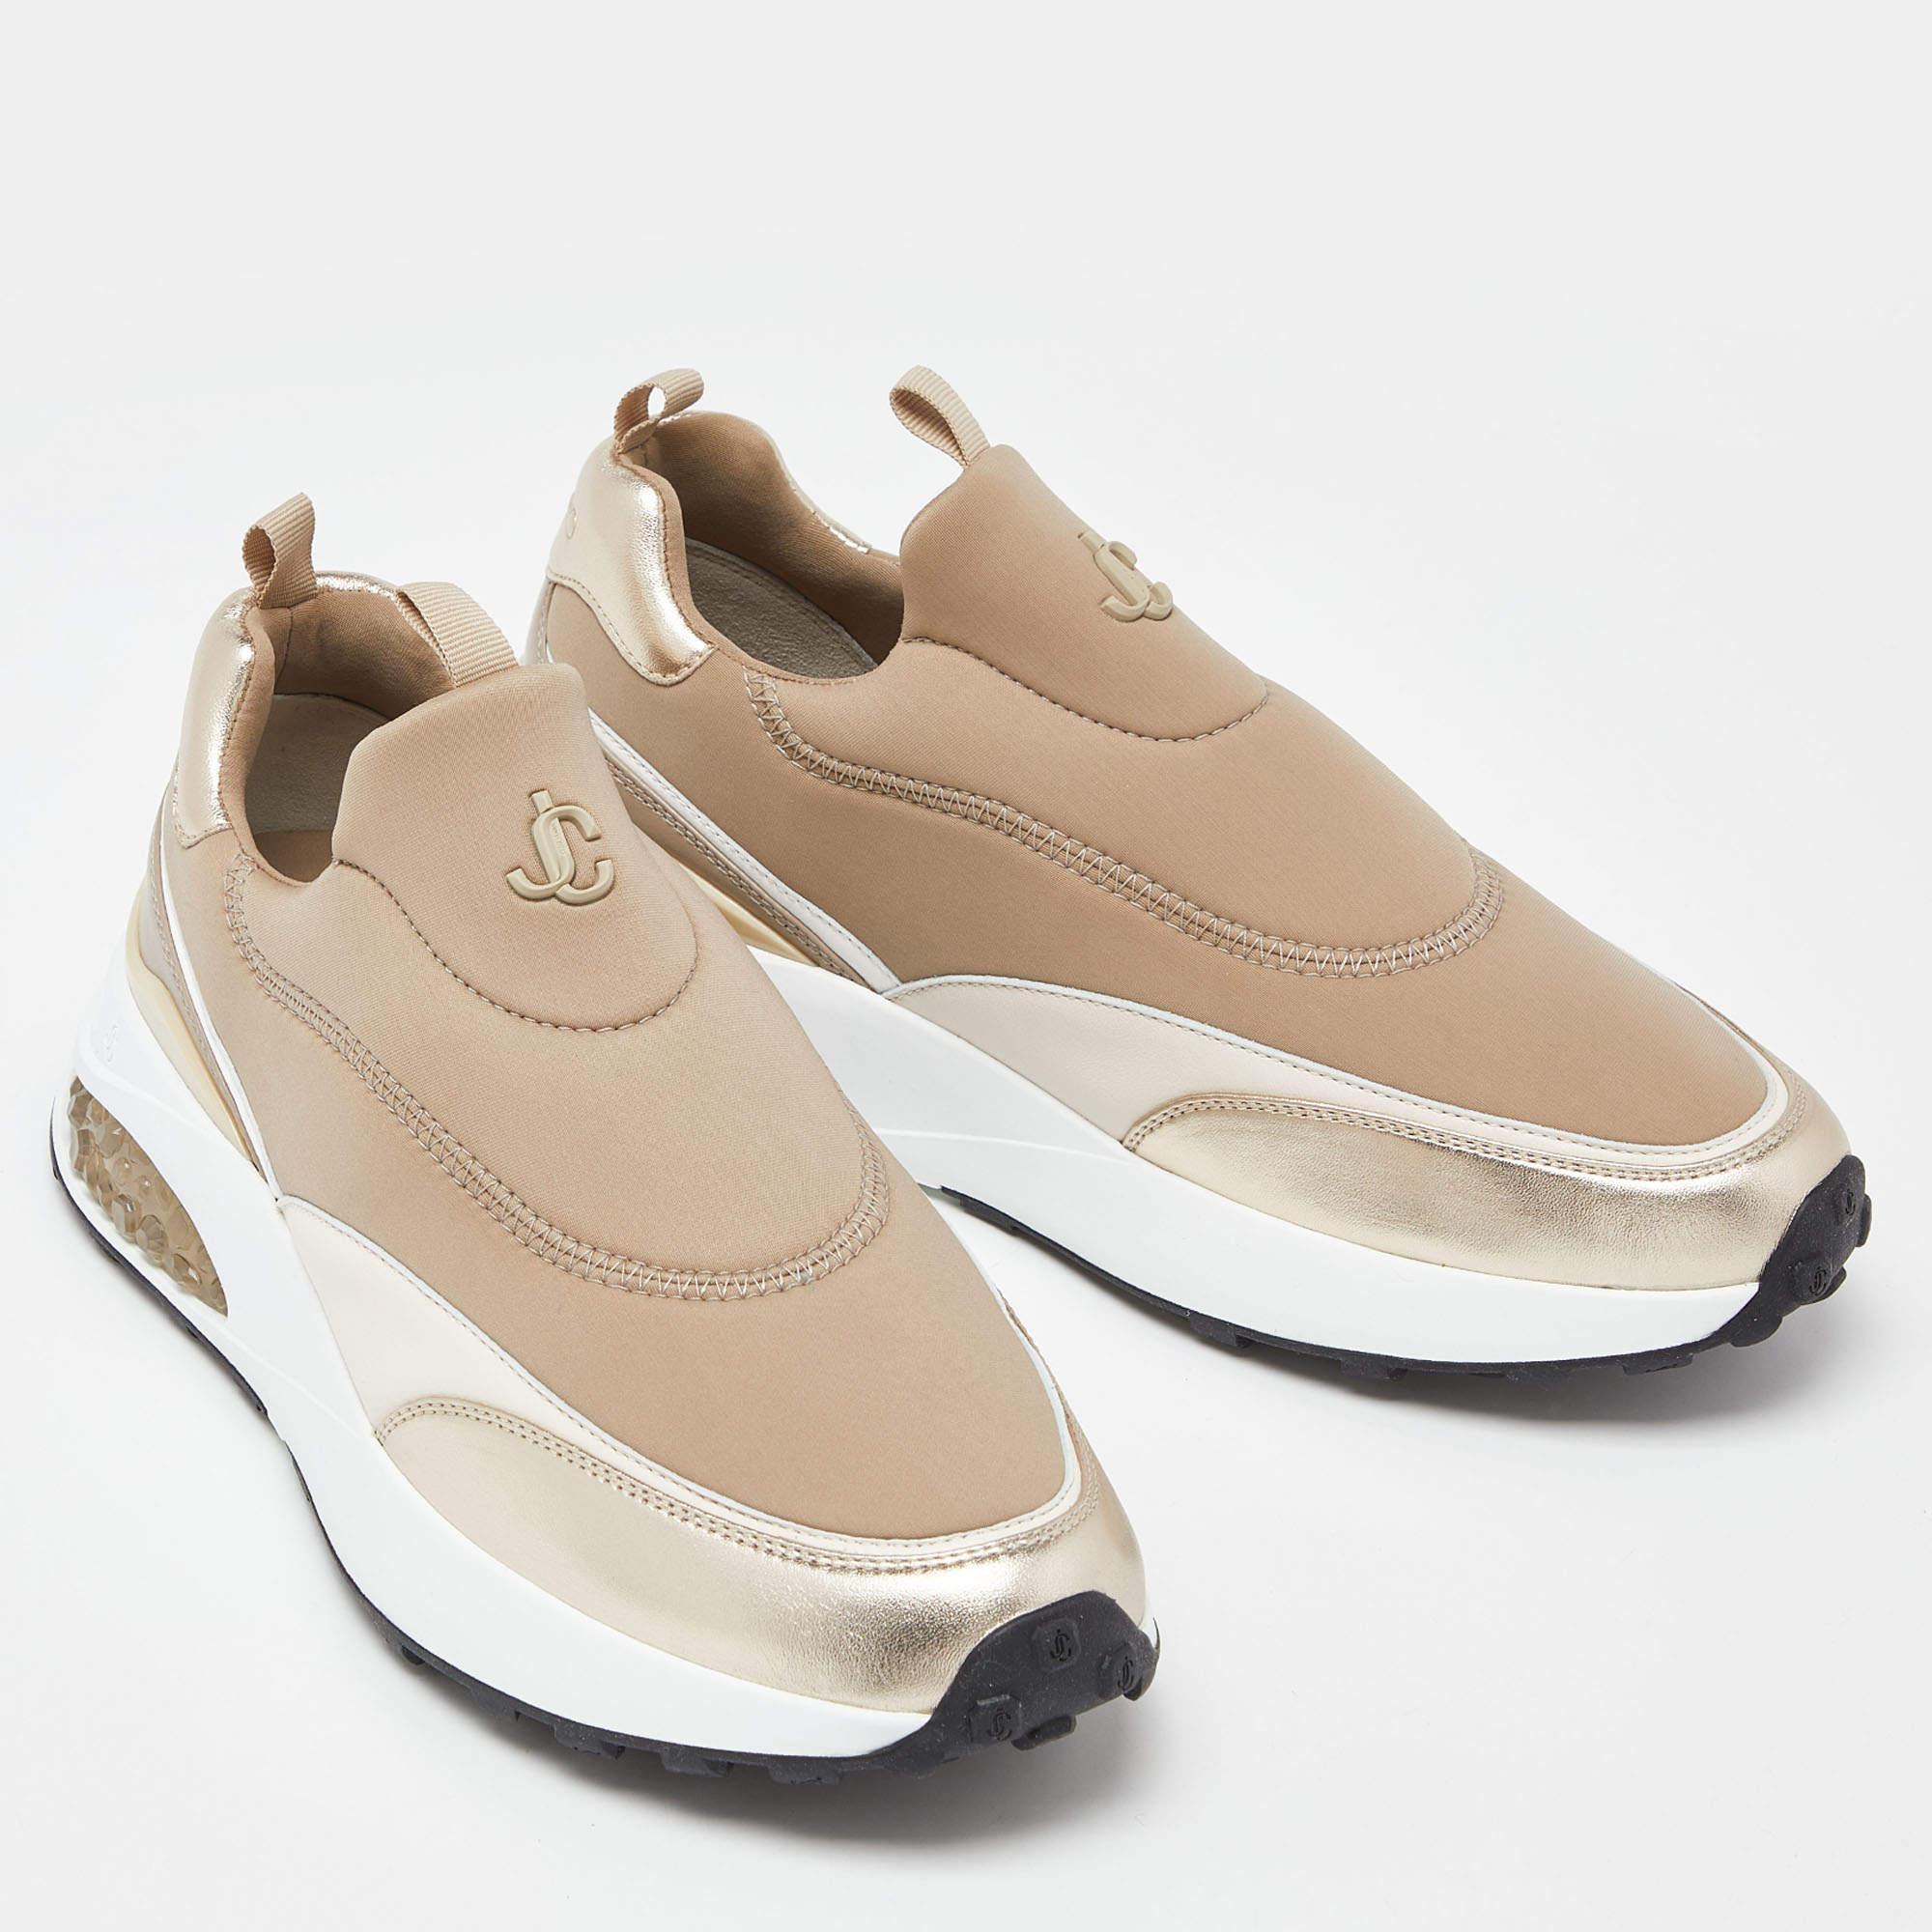 Jimmy Choo Beige Neoprene and Leather Memphis Sneakers Size 41 In Excellent Condition For Sale In Dubai, Al Qouz 2